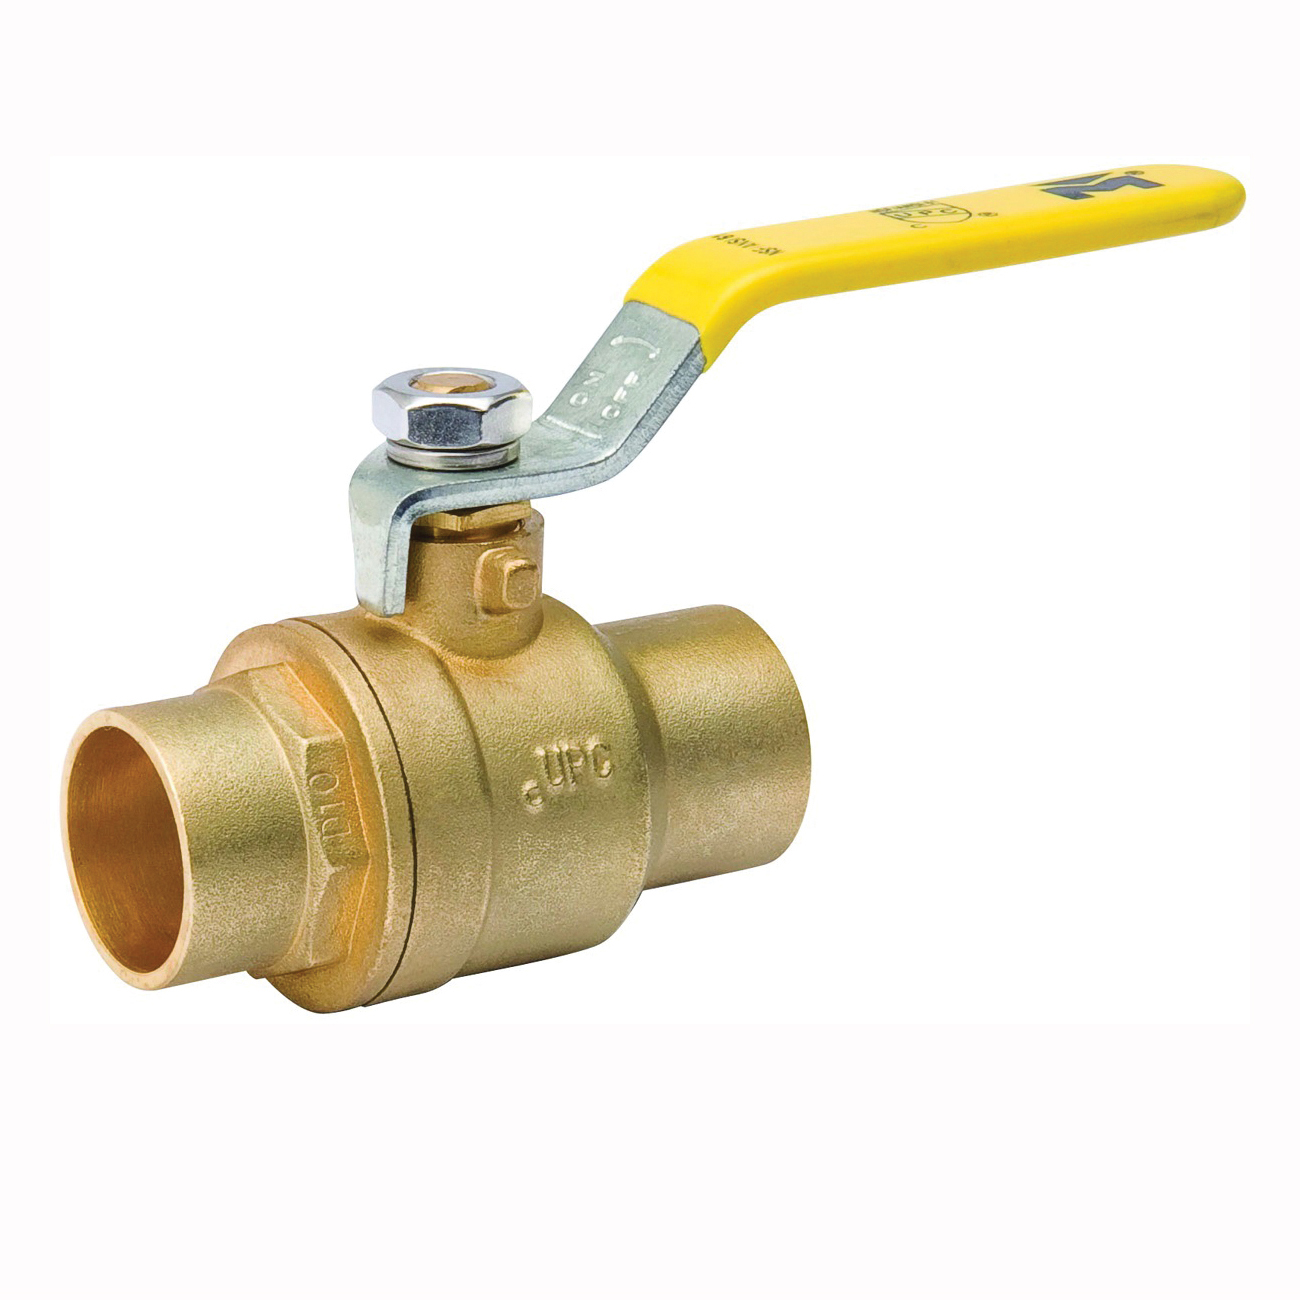 107-846NL Ball Valve, 1-1/4 in Connection, Compression, 600/150 psi Pressure, Manual Actuator, Brass Body